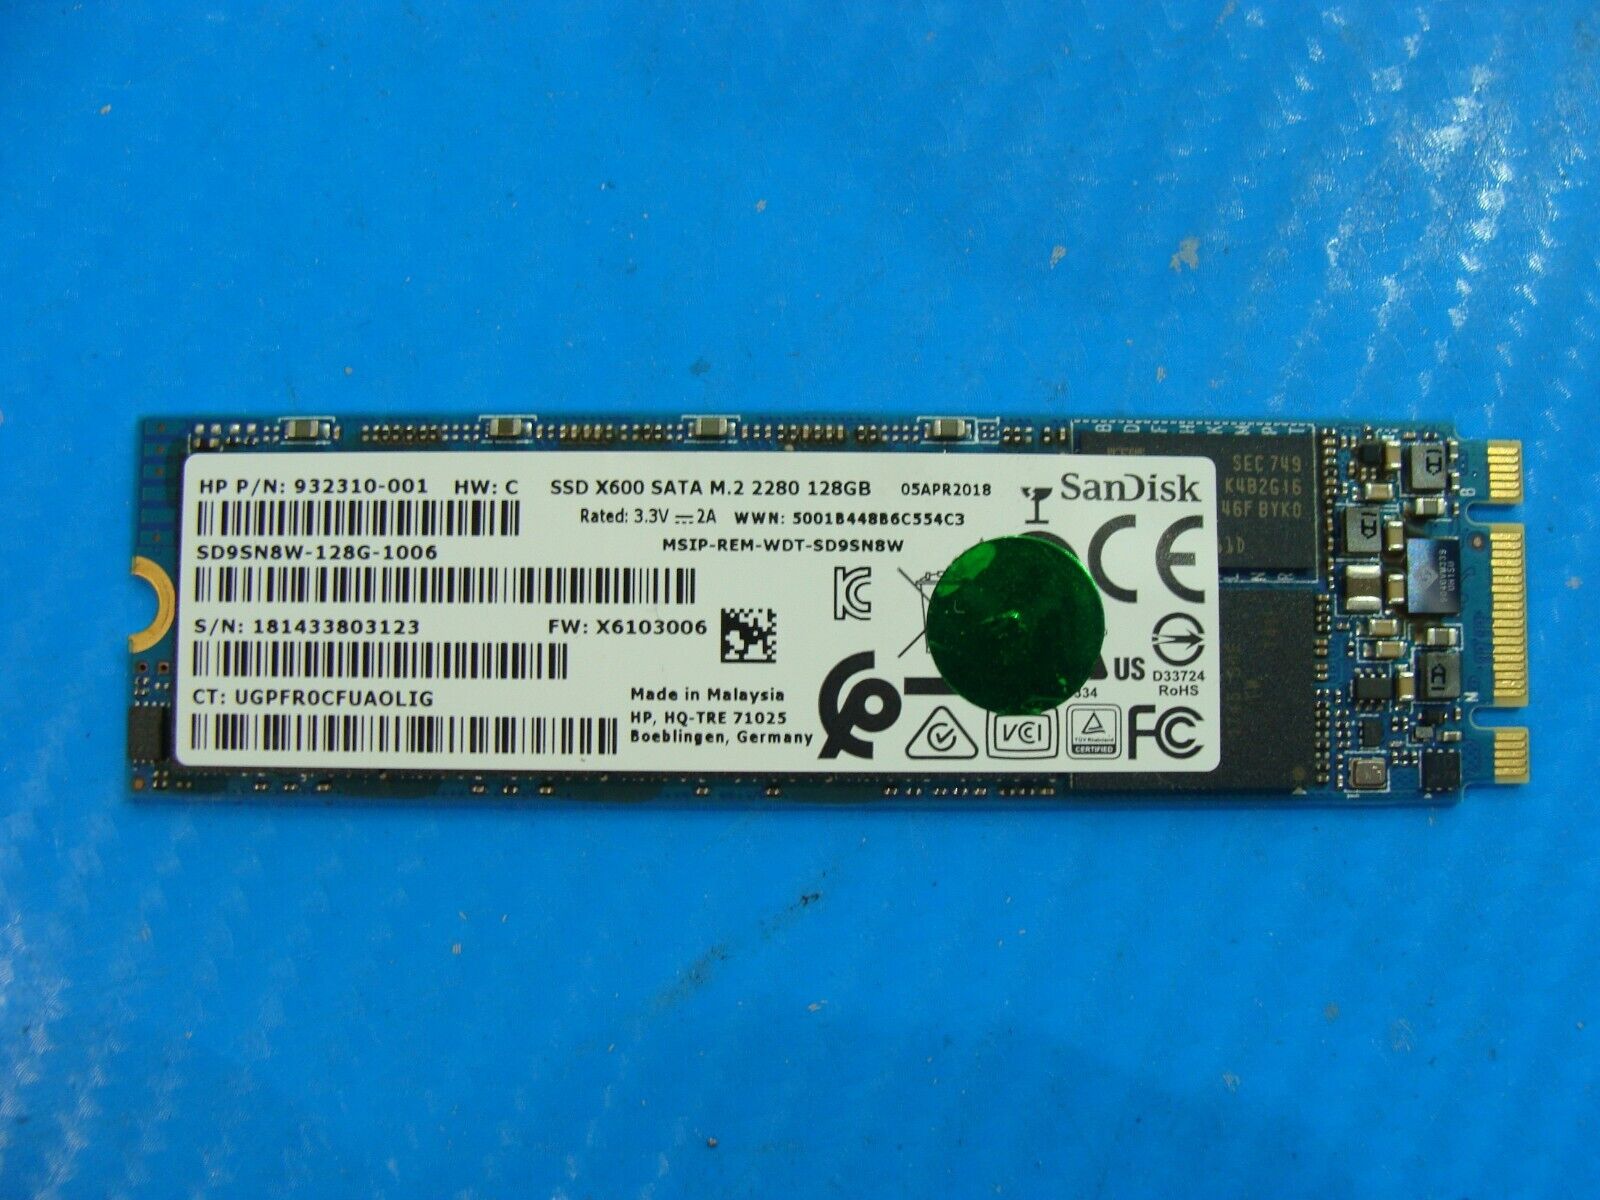 HP 15m-cp0011dx SanDisk SATA M.2 128GB SSD Solid State Drive SD9SN8W-128G-1006